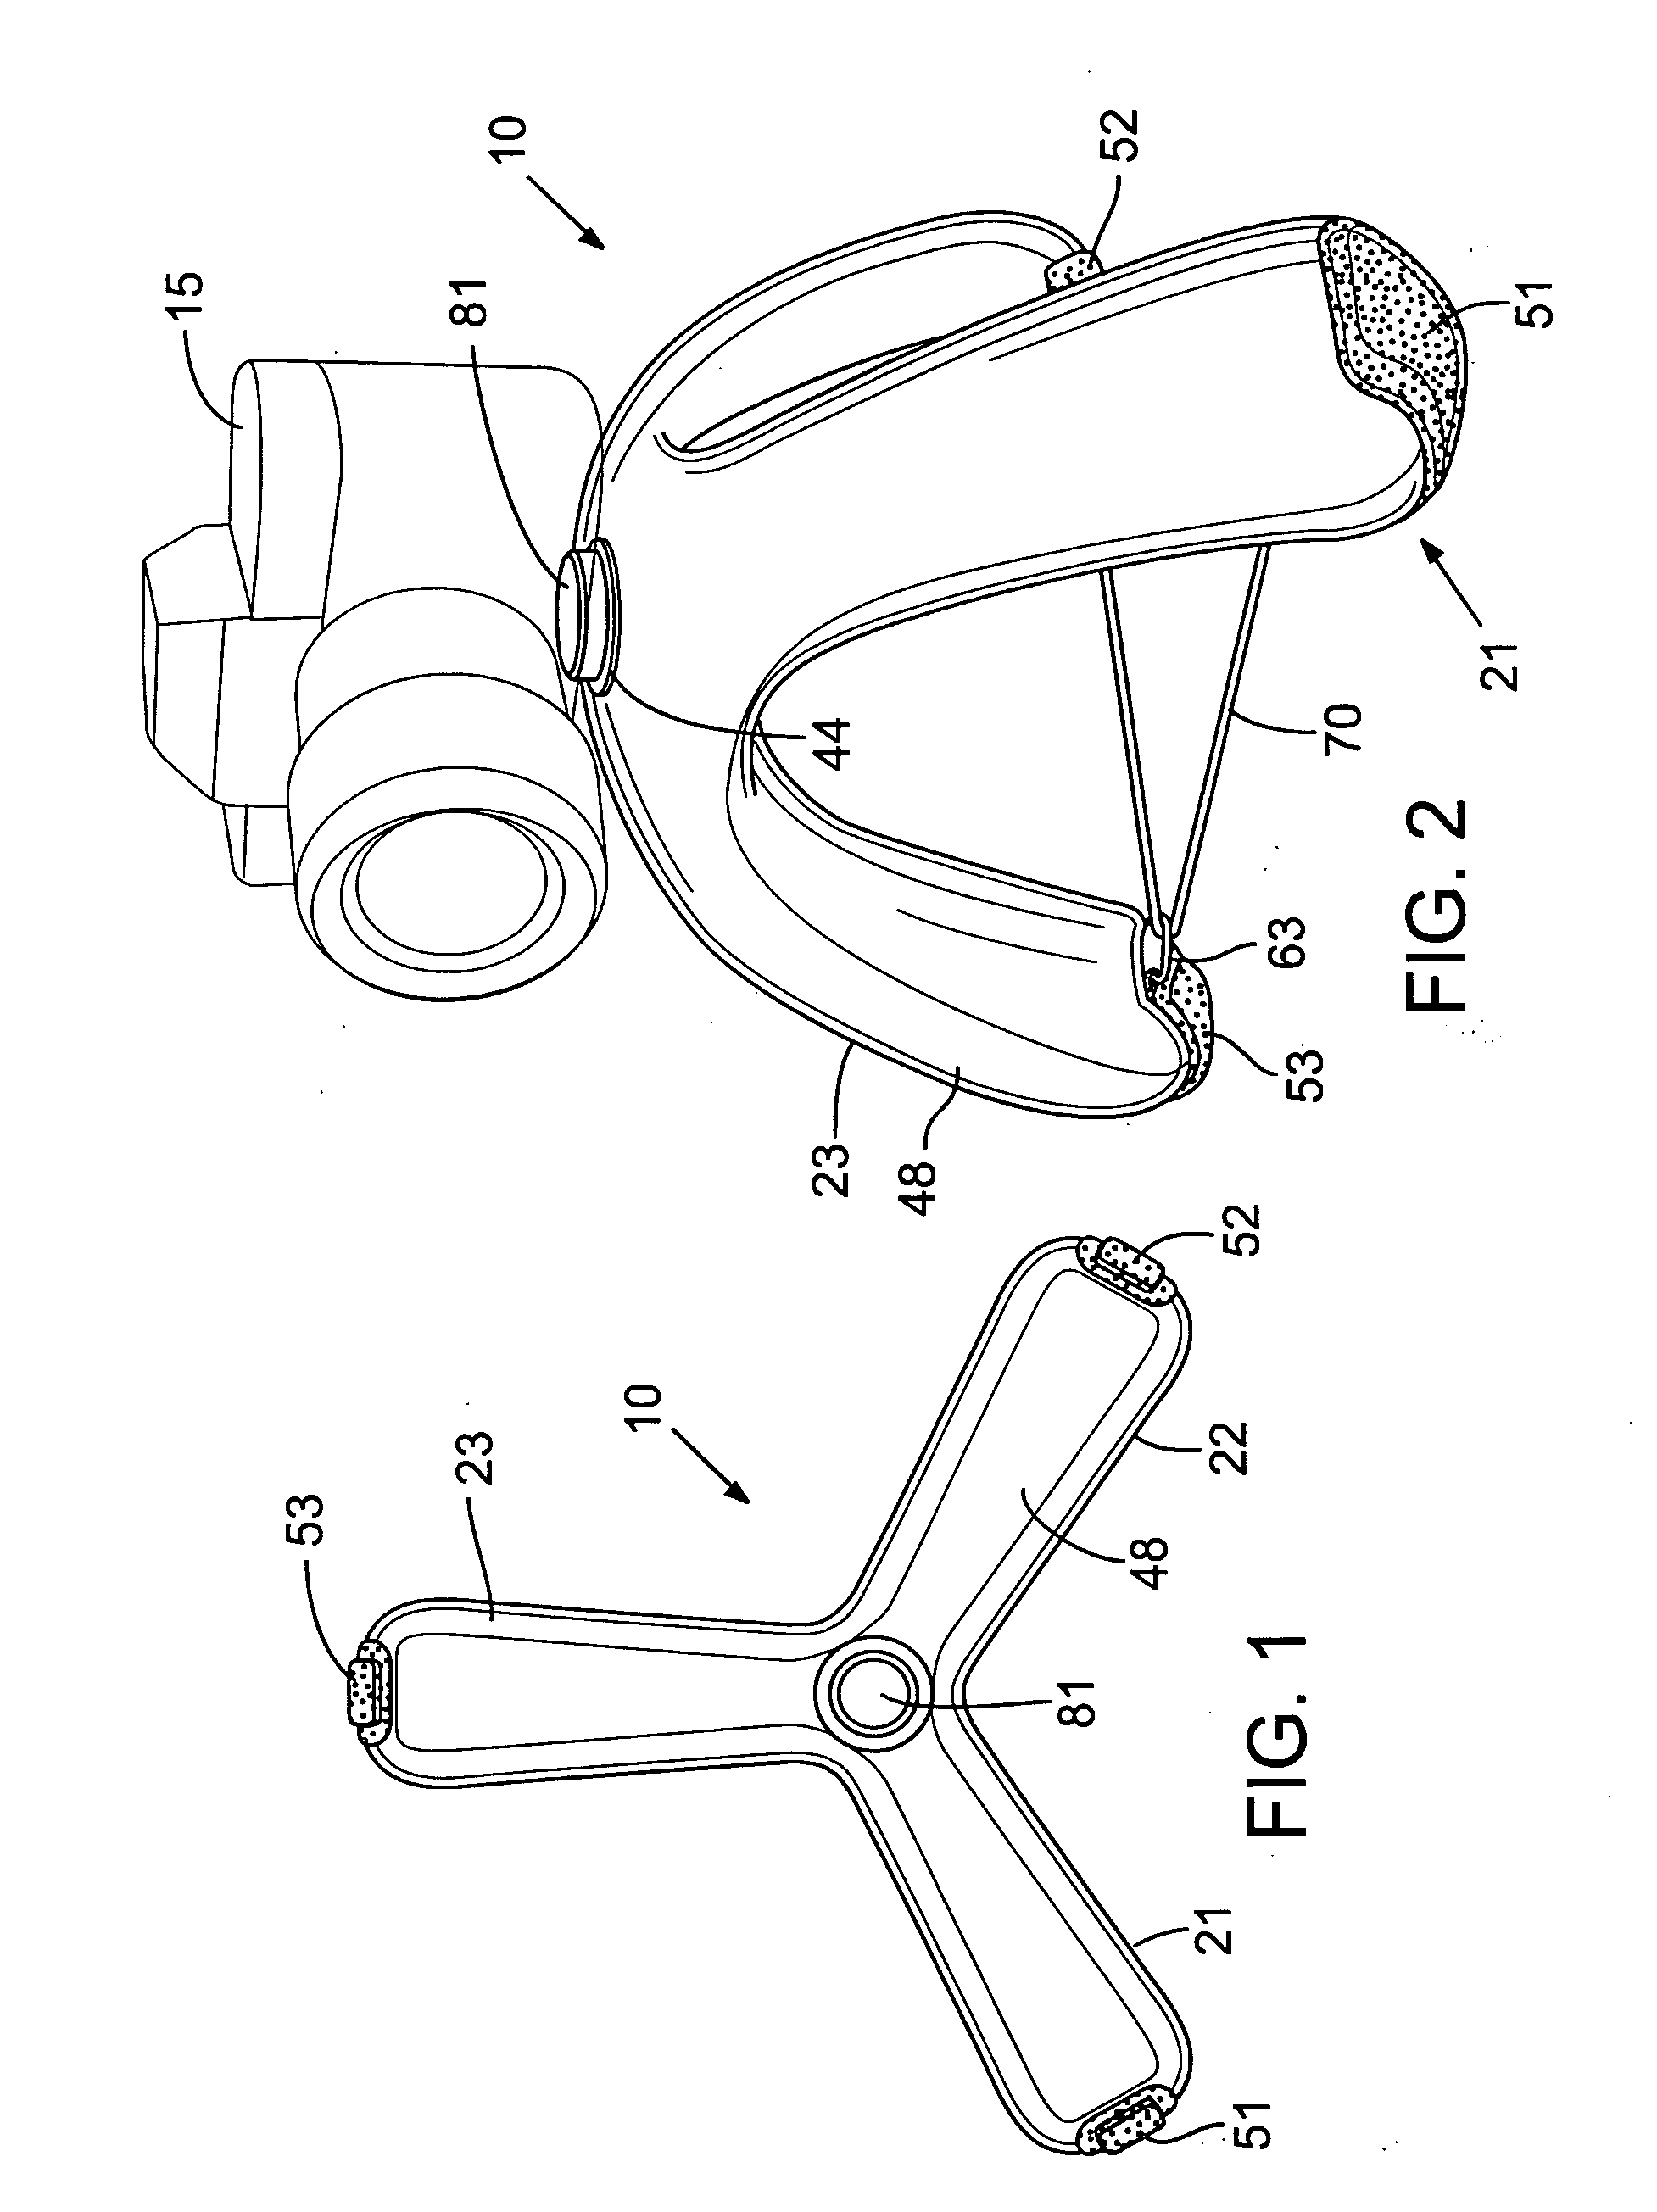 Flexible, positionable and grasping camera or other device mount apparatus